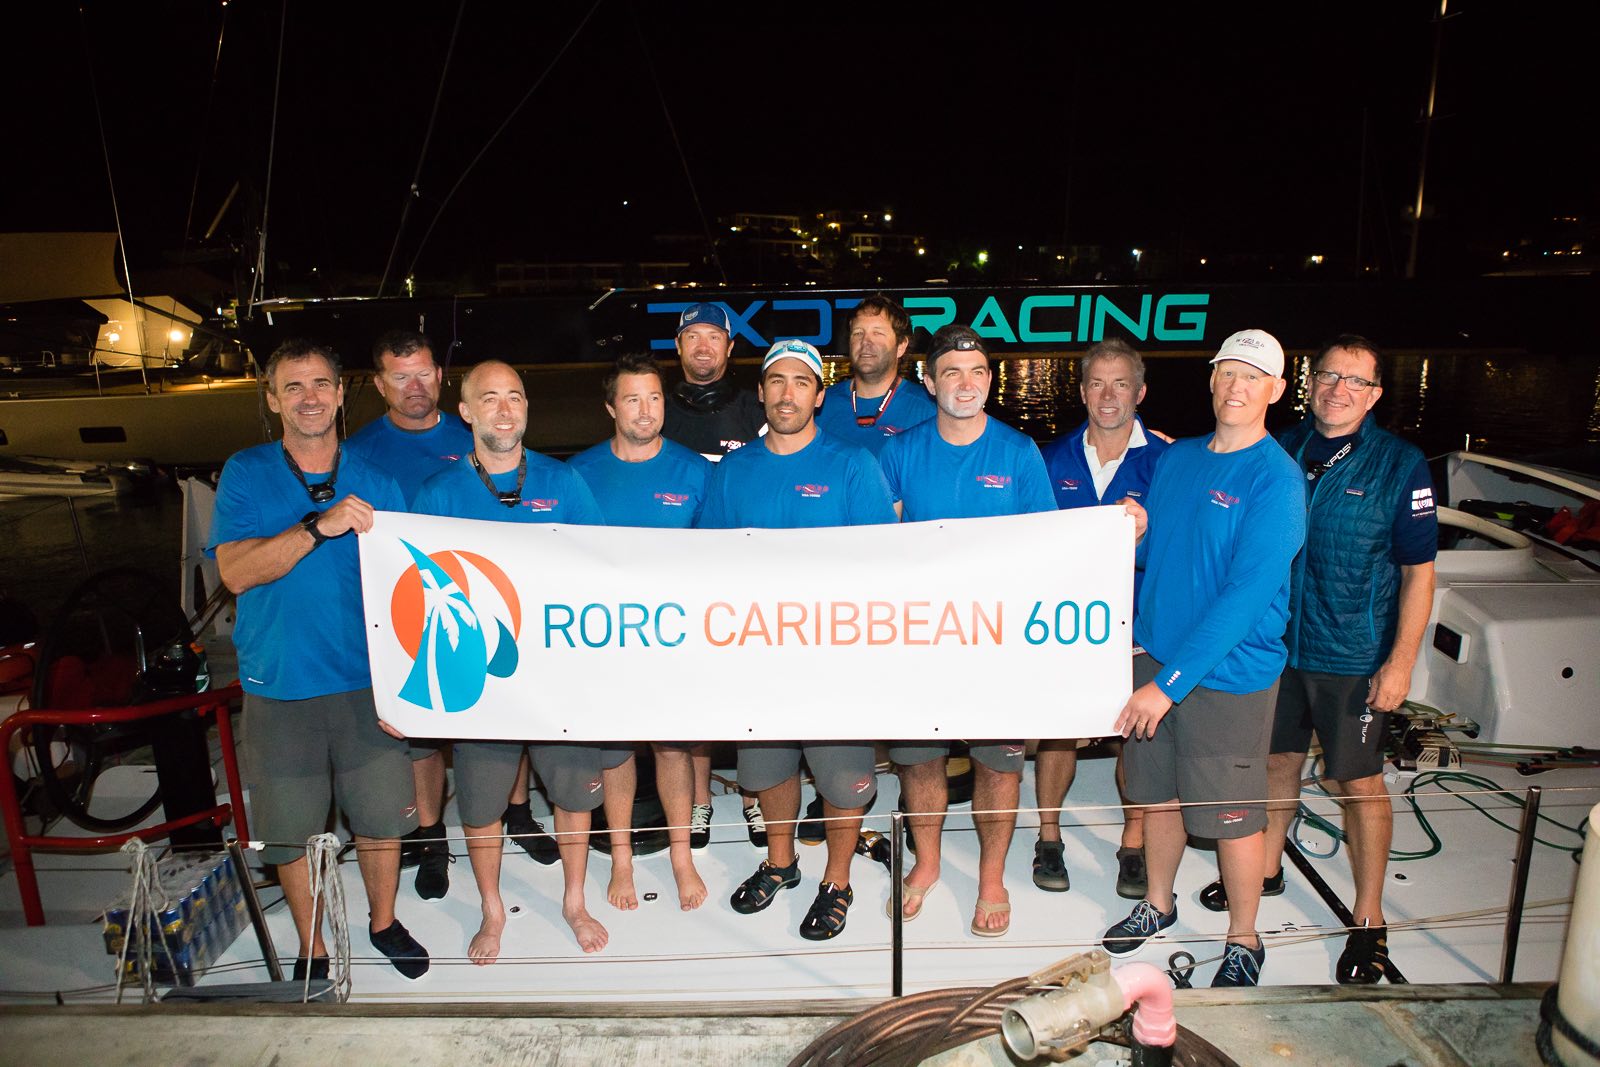 Team Wizard dockside after taking Monohull Line Honours in the 2020 RORC Caribbean 600  Team Wizard: Peter Askew, Chris Maxted, Richard Clarke, Charlie Enright, Joseph Fanelli, Robert Greenhalgh, Phillip Harmer, Robbie Kane, William Oxley, Mark Towill © Arthur Daniel/RORC